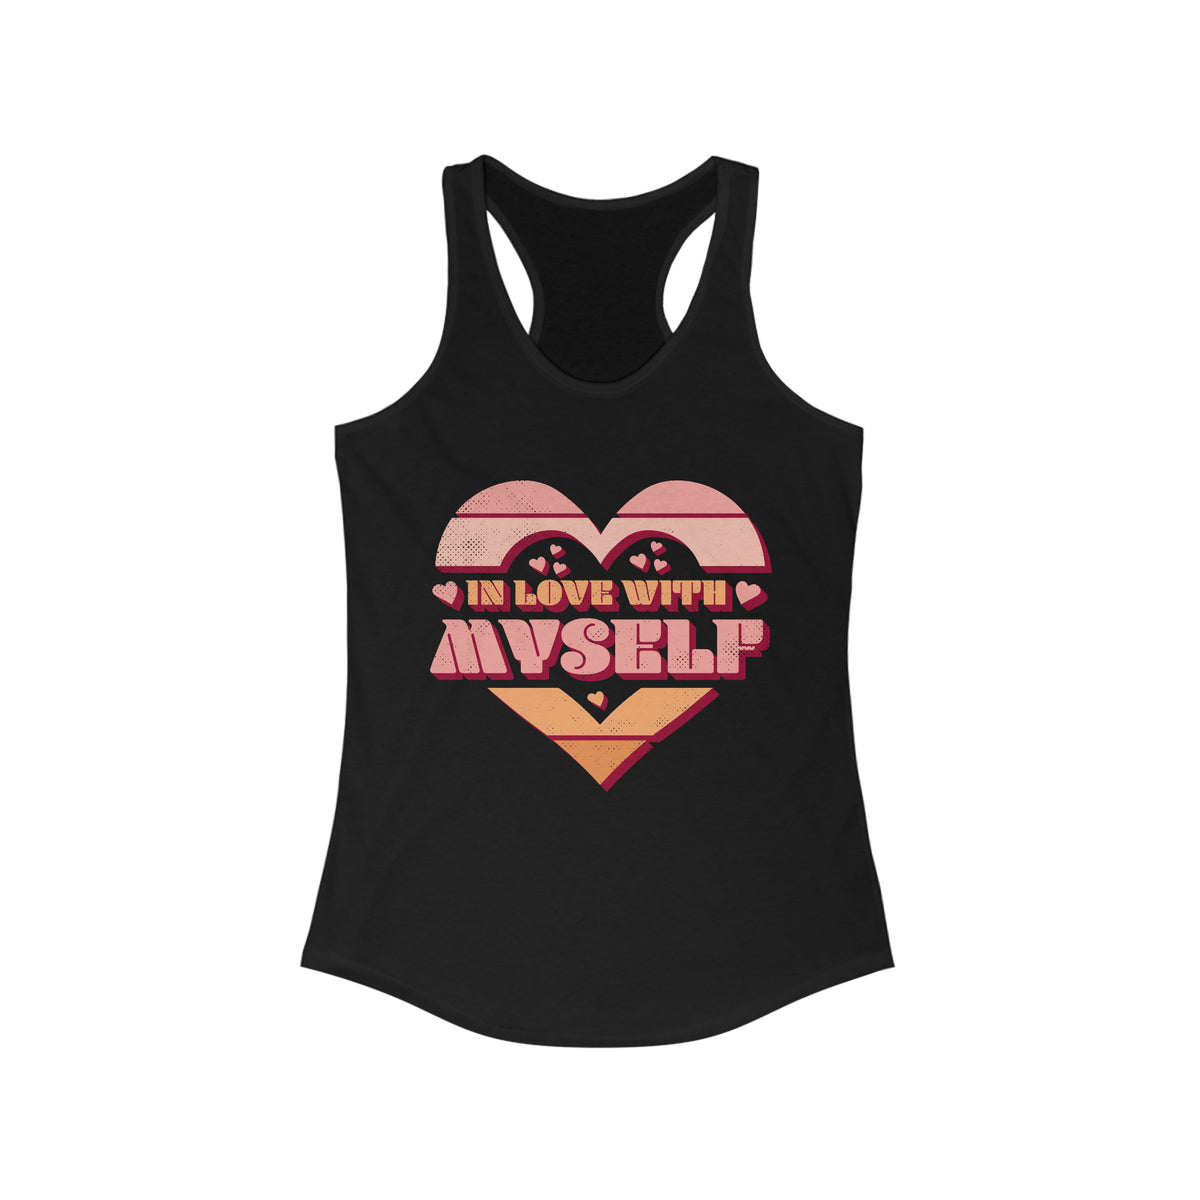 In Love With Myself Affirmation Shirt | Valentines Day Shirt | Gift For Her | Women's Slim-fit Racerback Tank